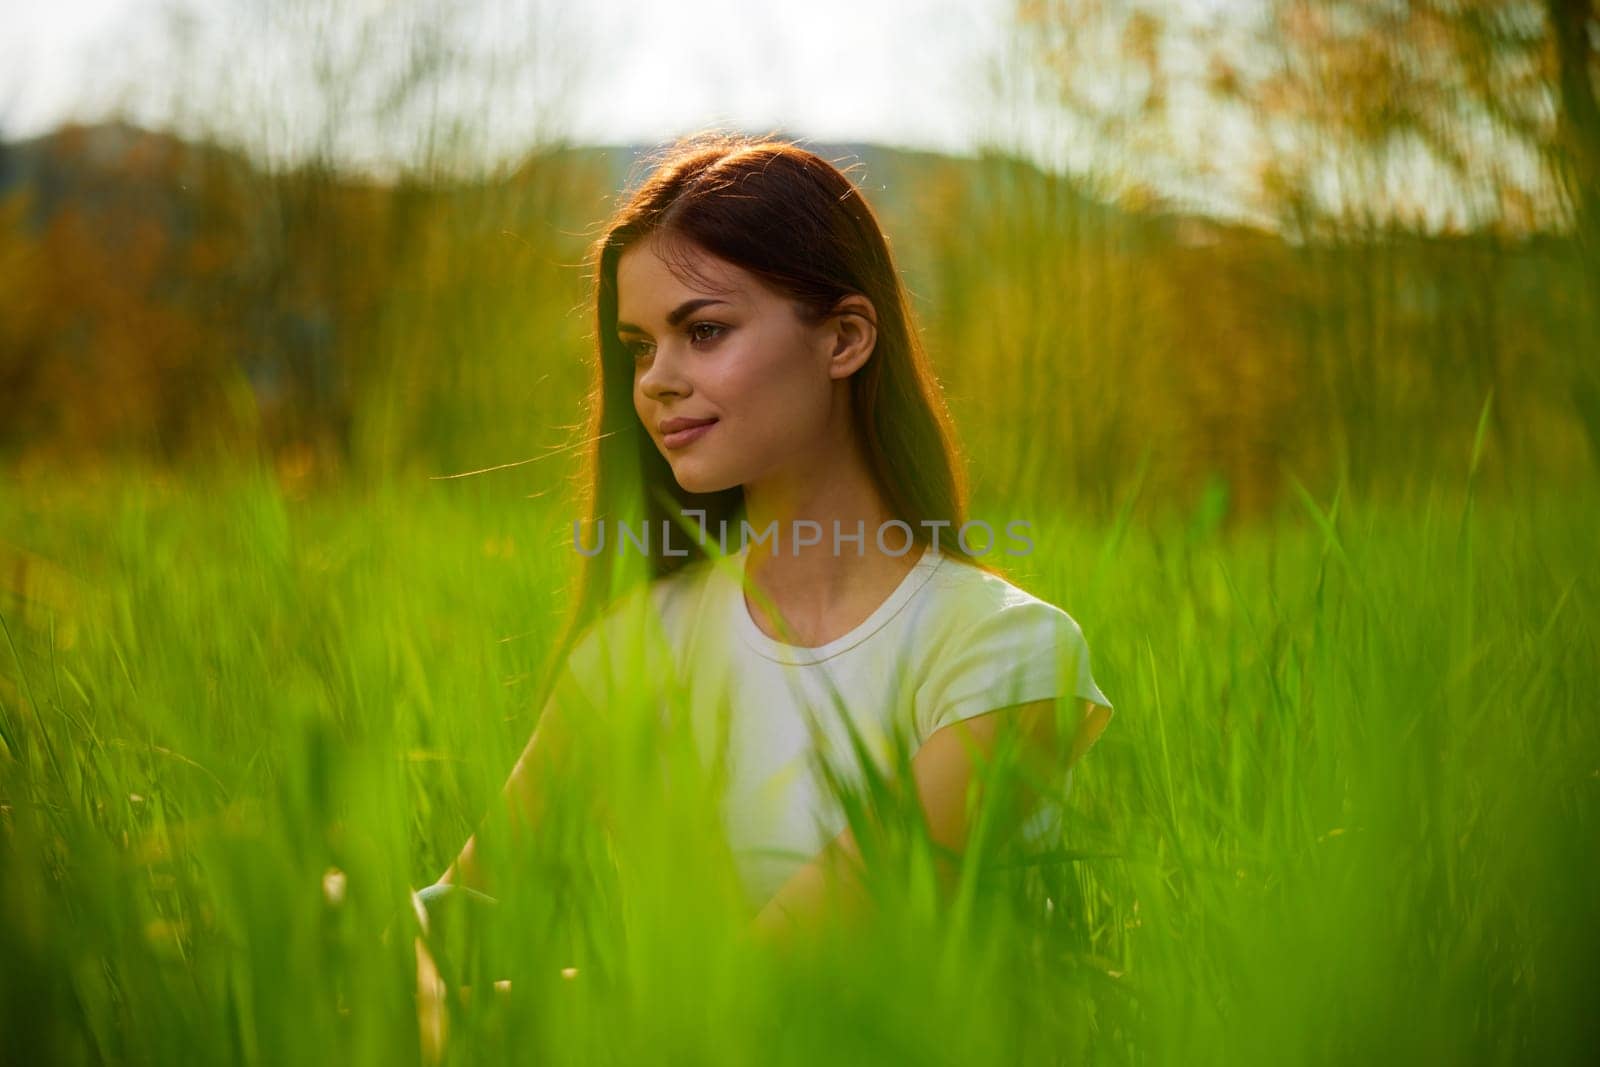 portrait of a happy woman in a white t-shirt shot through grass leaves in a field by Vichizh